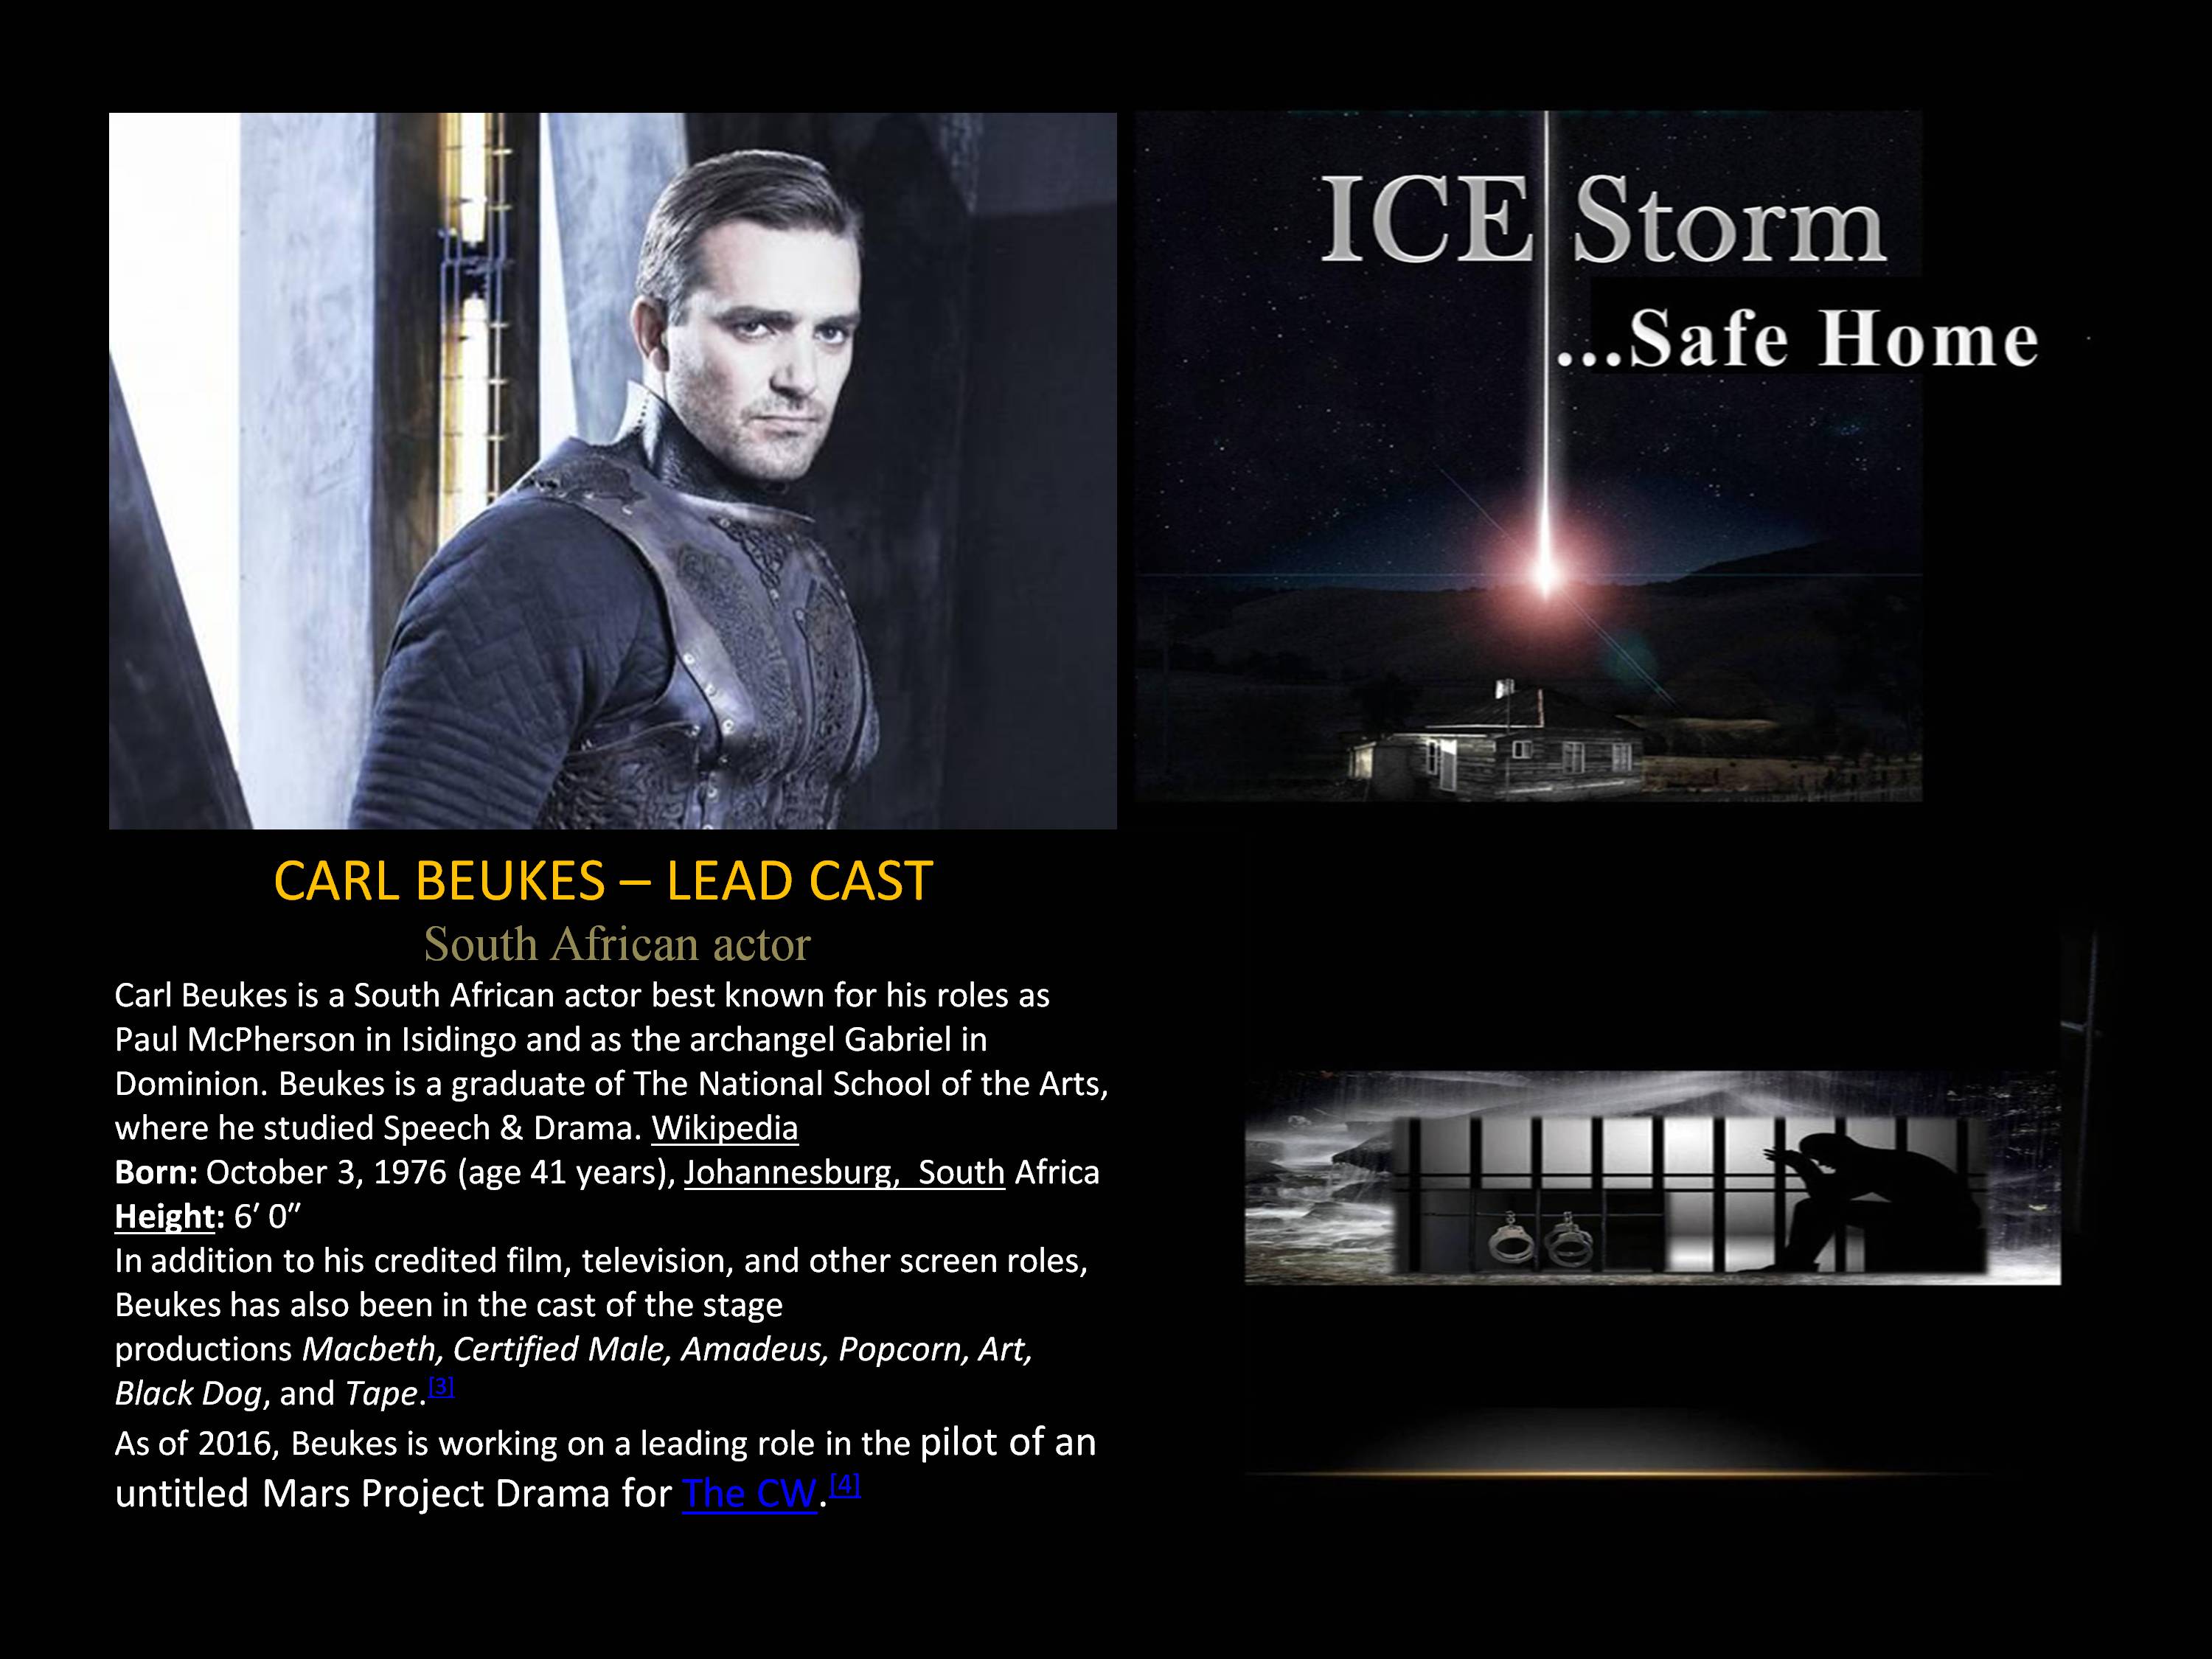 ICE STORM FILM PACKAGE 8